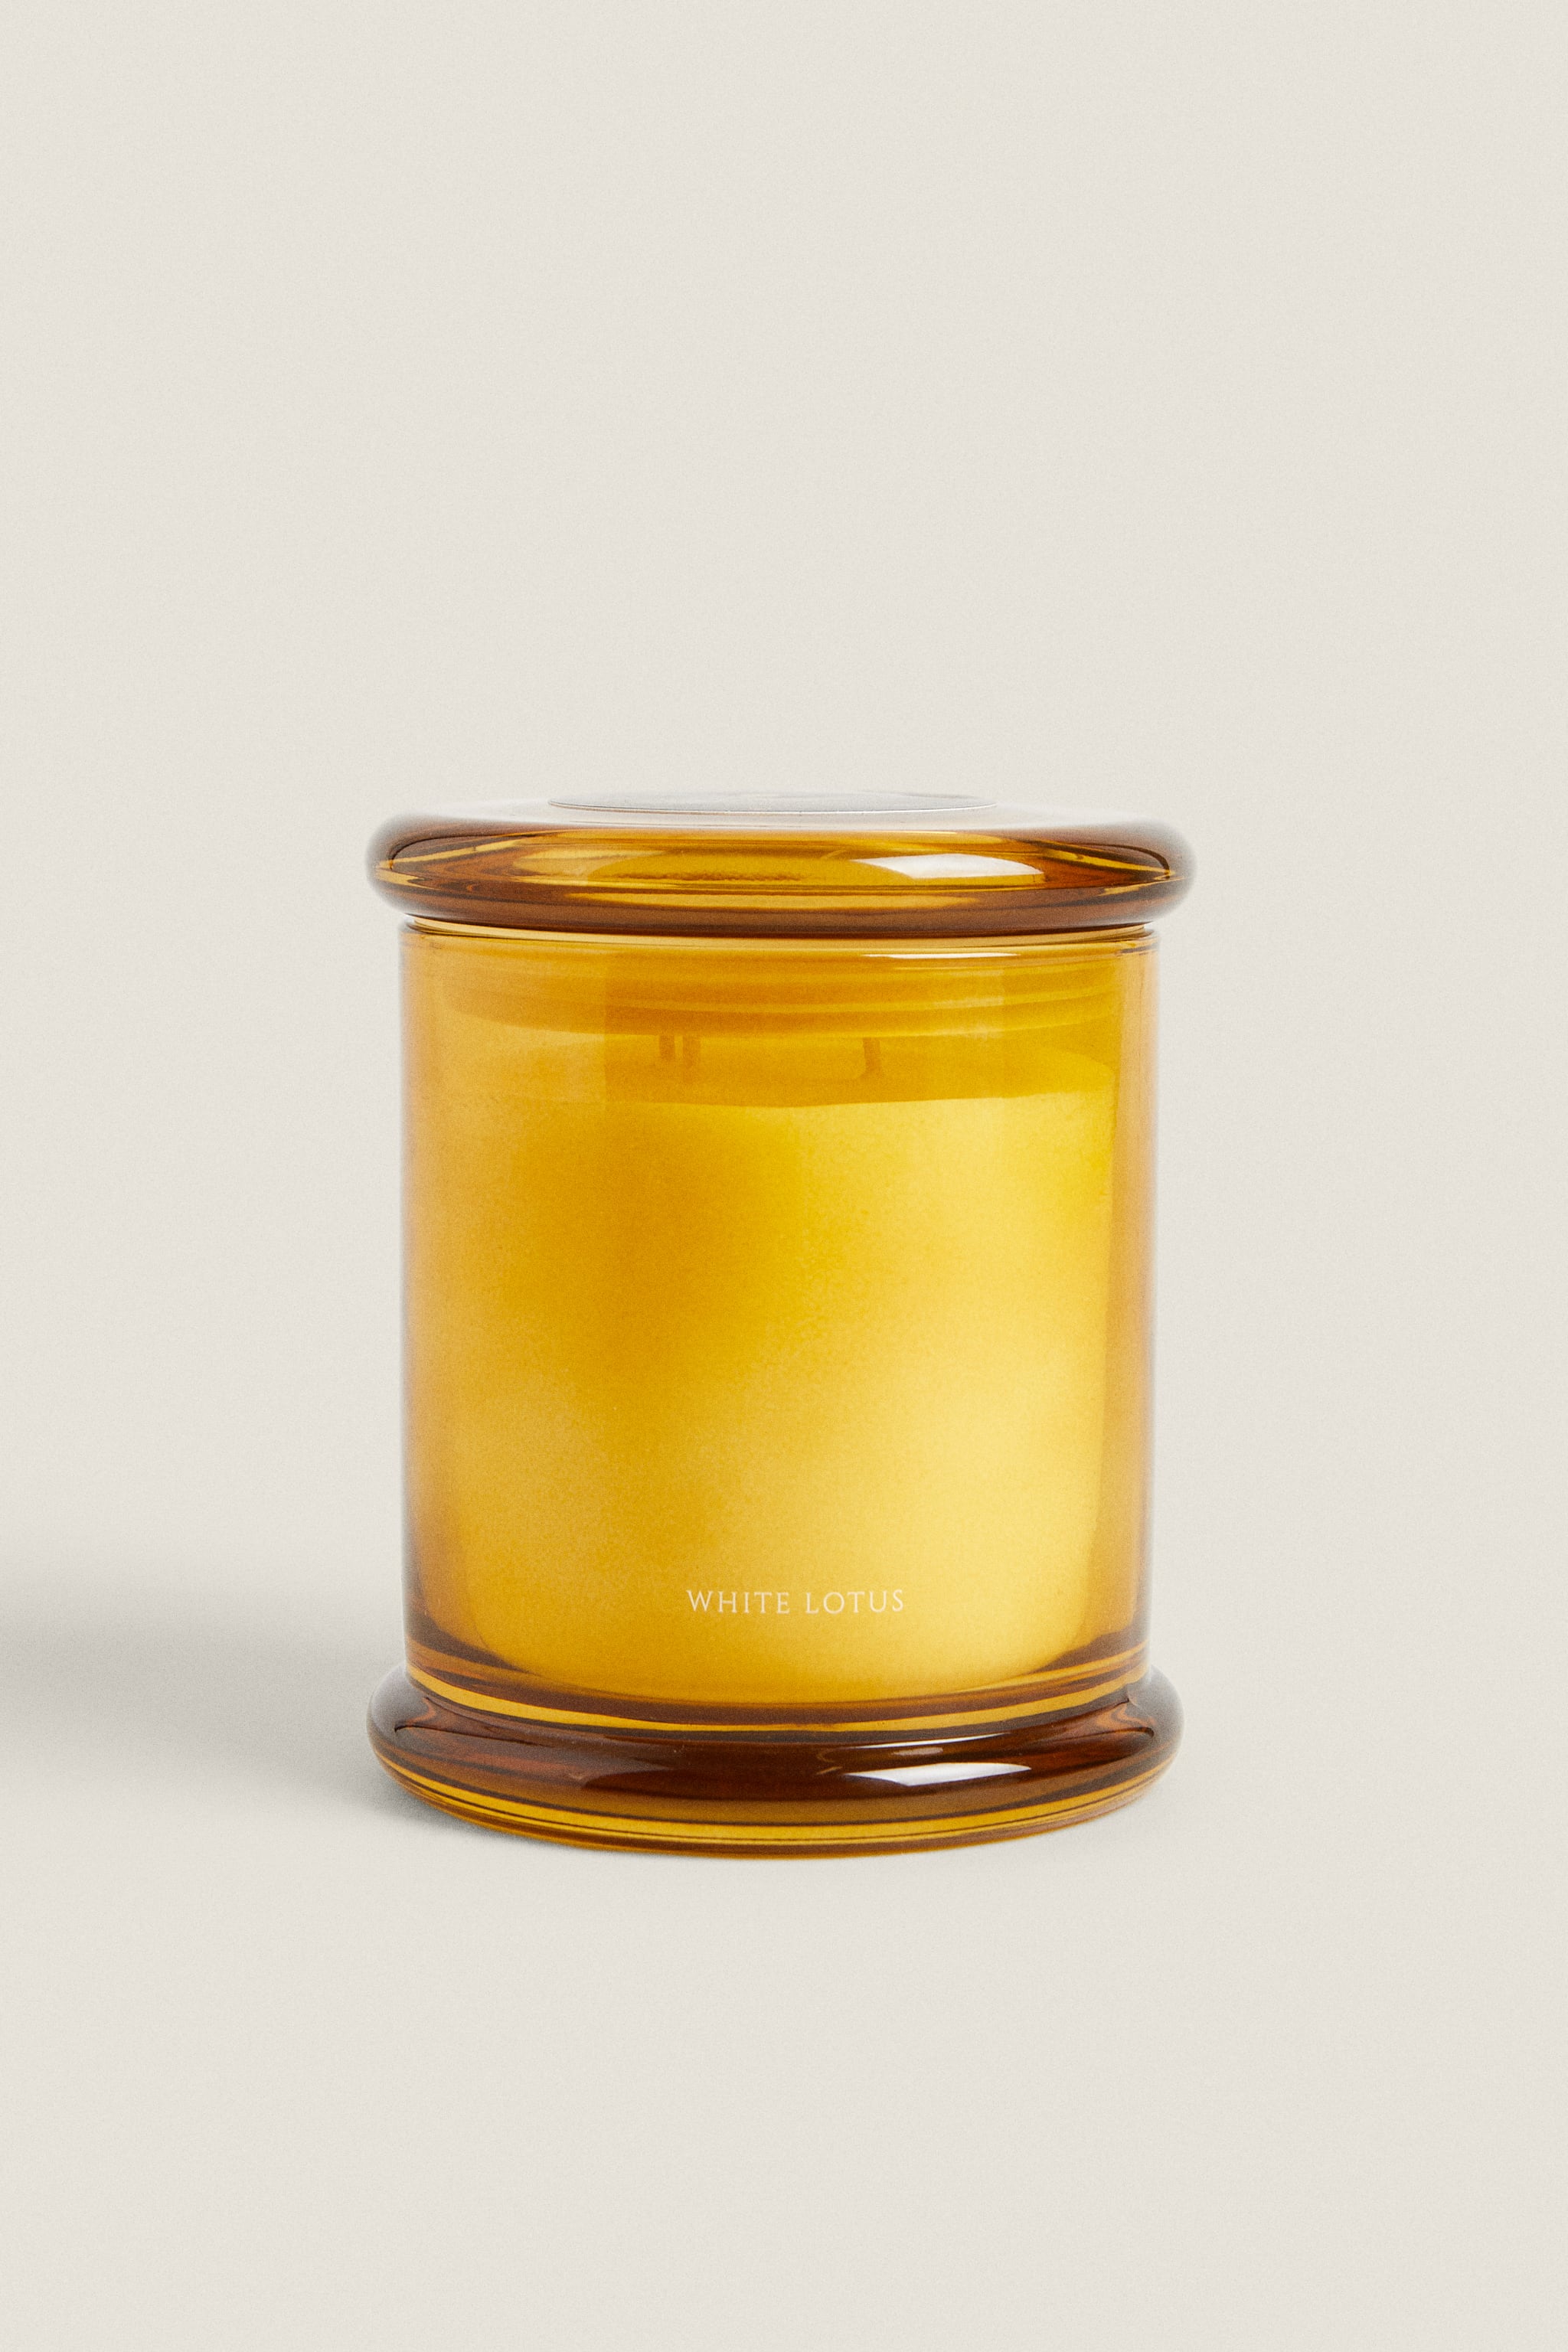 G) WHITE LOTUS SCENTED CANDLE